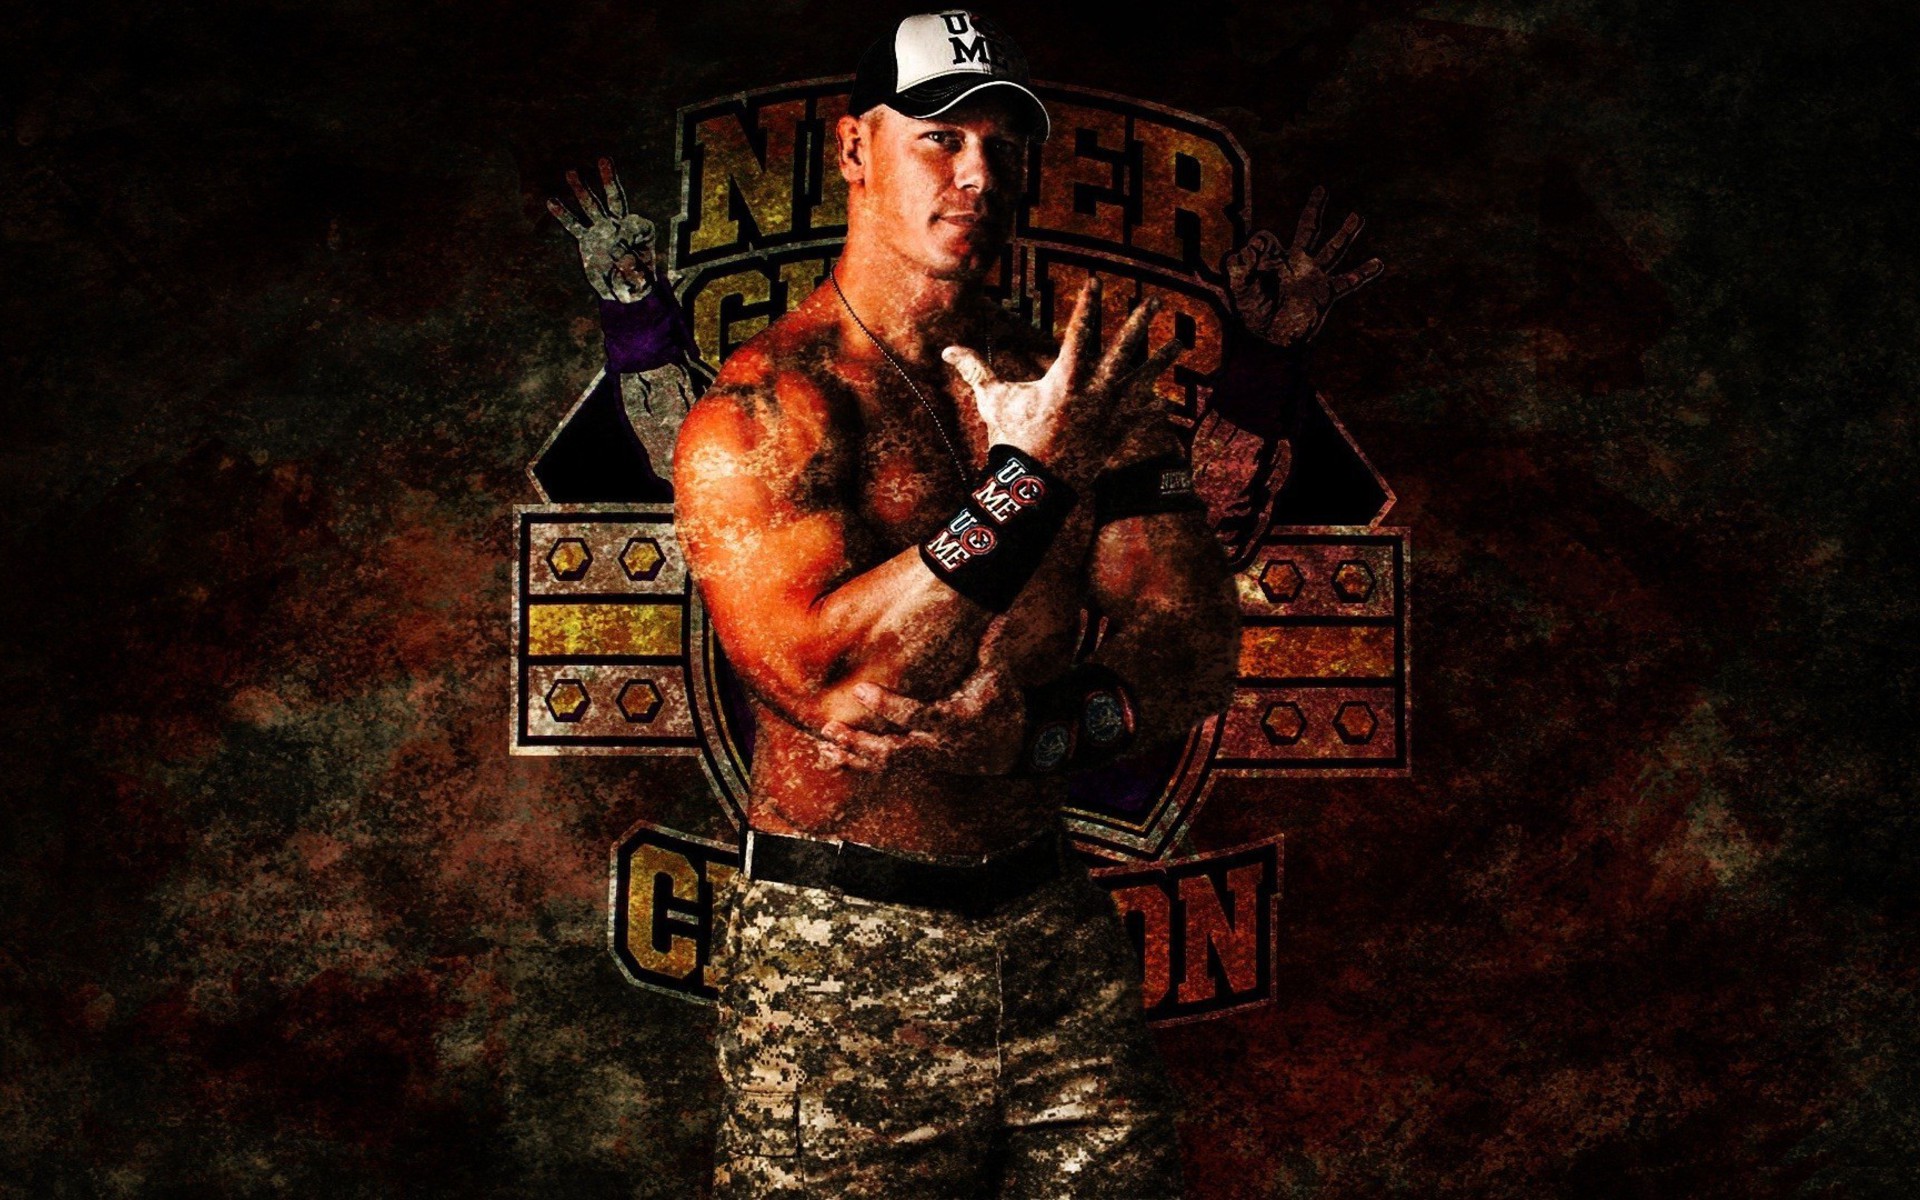 john cena hd wallpapers 1366x768,pc game,muscle,games,font,adventure game